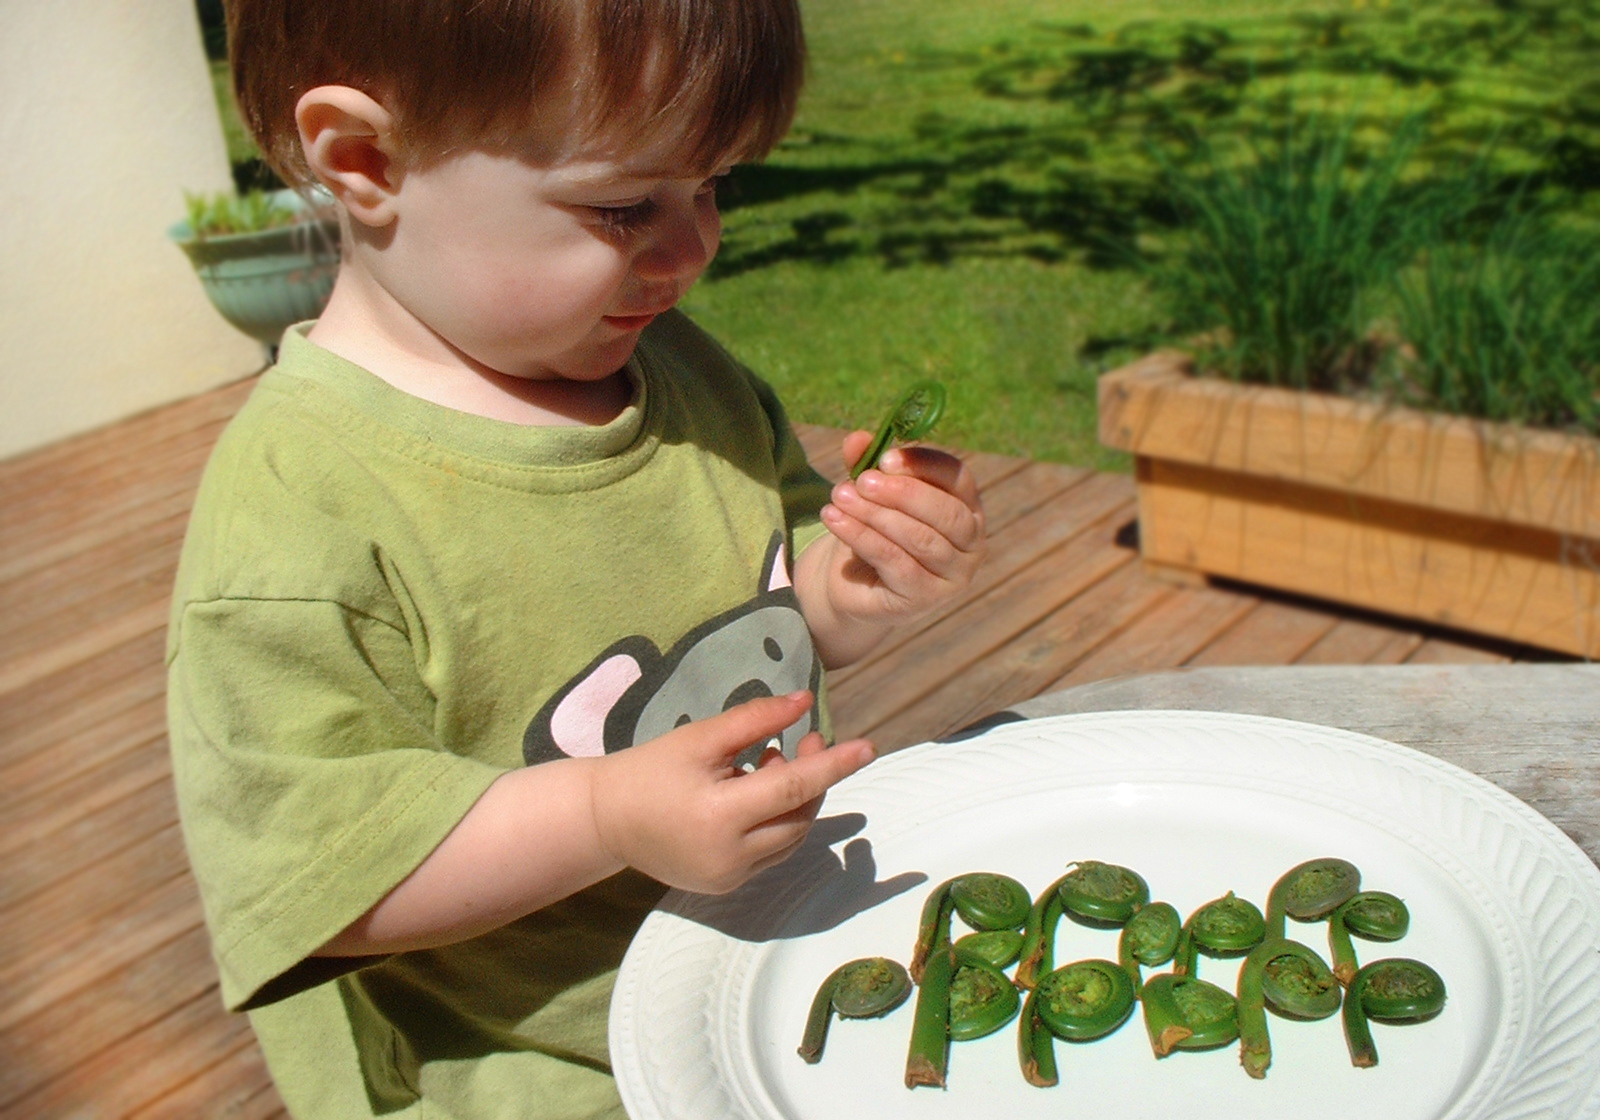 Rhiannon's toddler wearing a green shirt, holding a fiddlehead fern with chubby fingers, and looking at a plate of lined up fiddlehead ferns